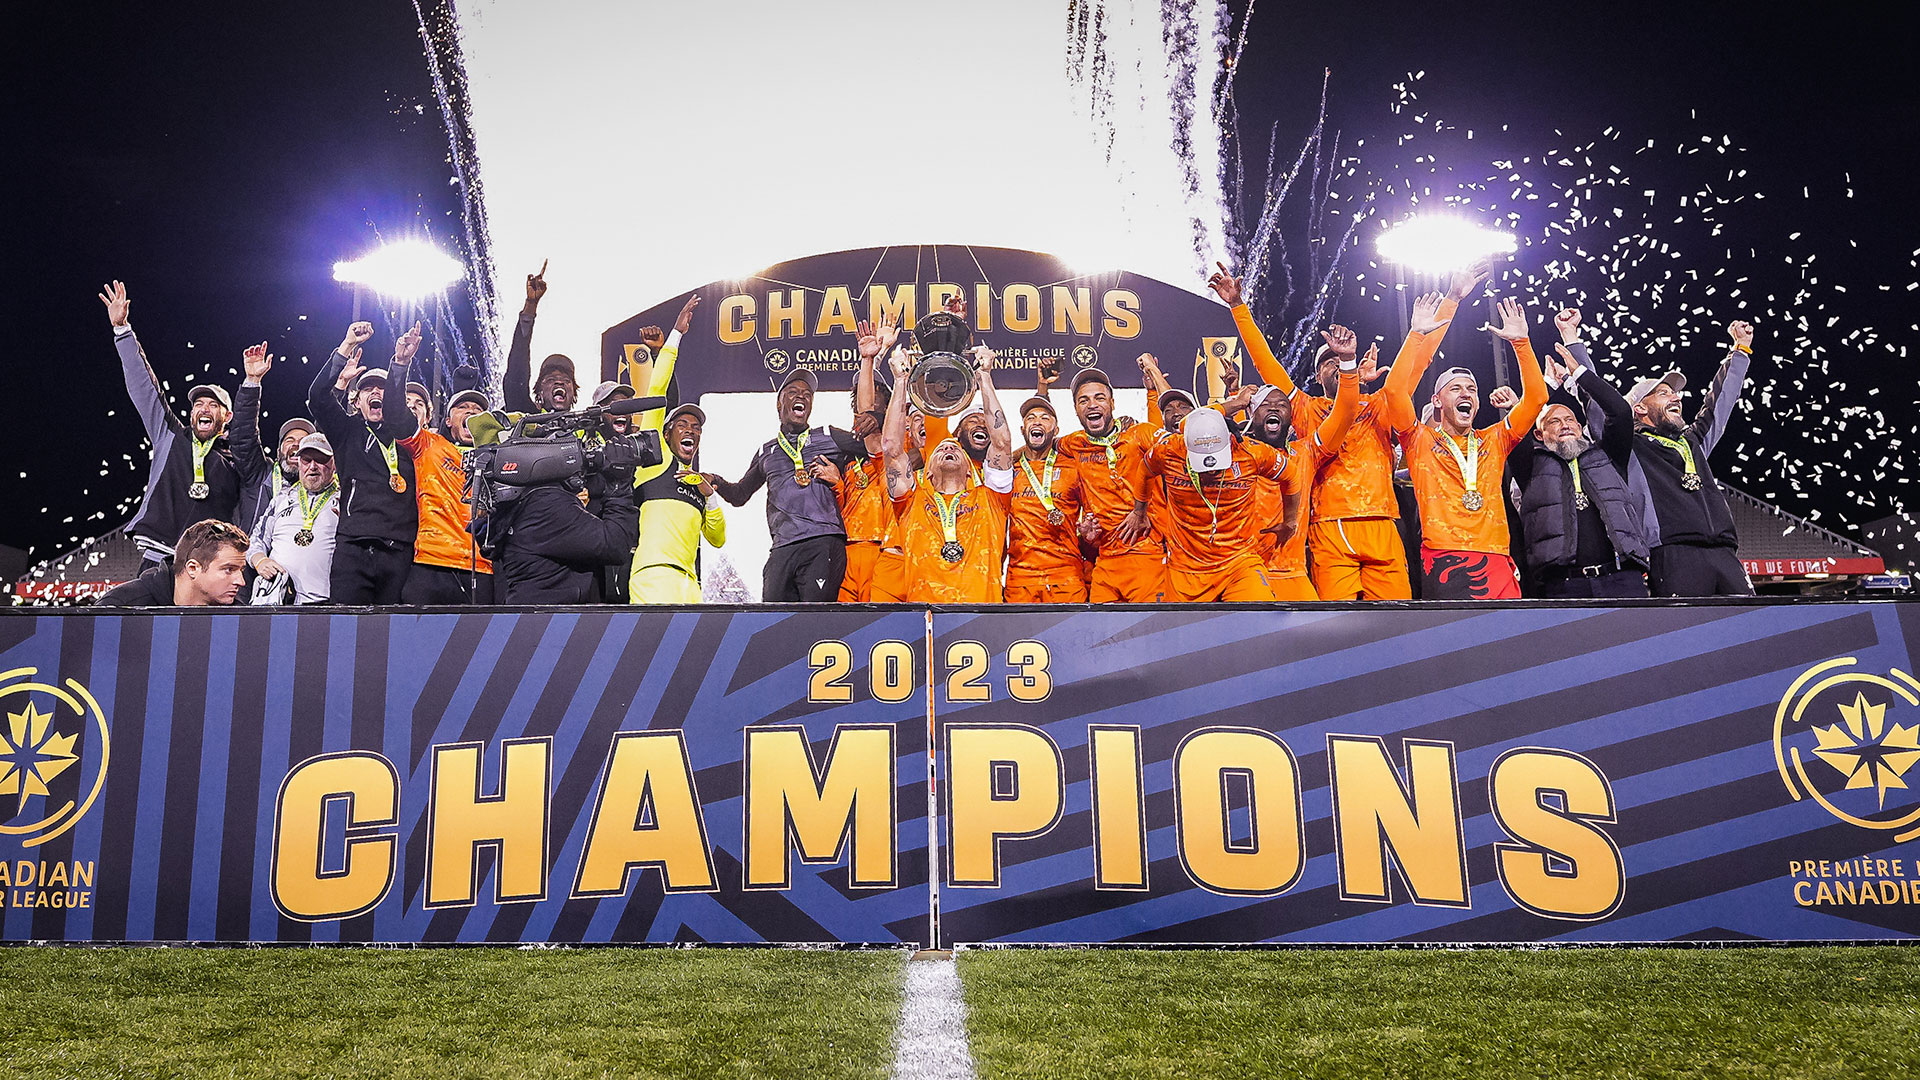 Kyle Bekker of Forge FC lifting the North Star Cup with his teammates after winning the 2023 CPL final on October 28, 2023 (Photo credit: David Chant)